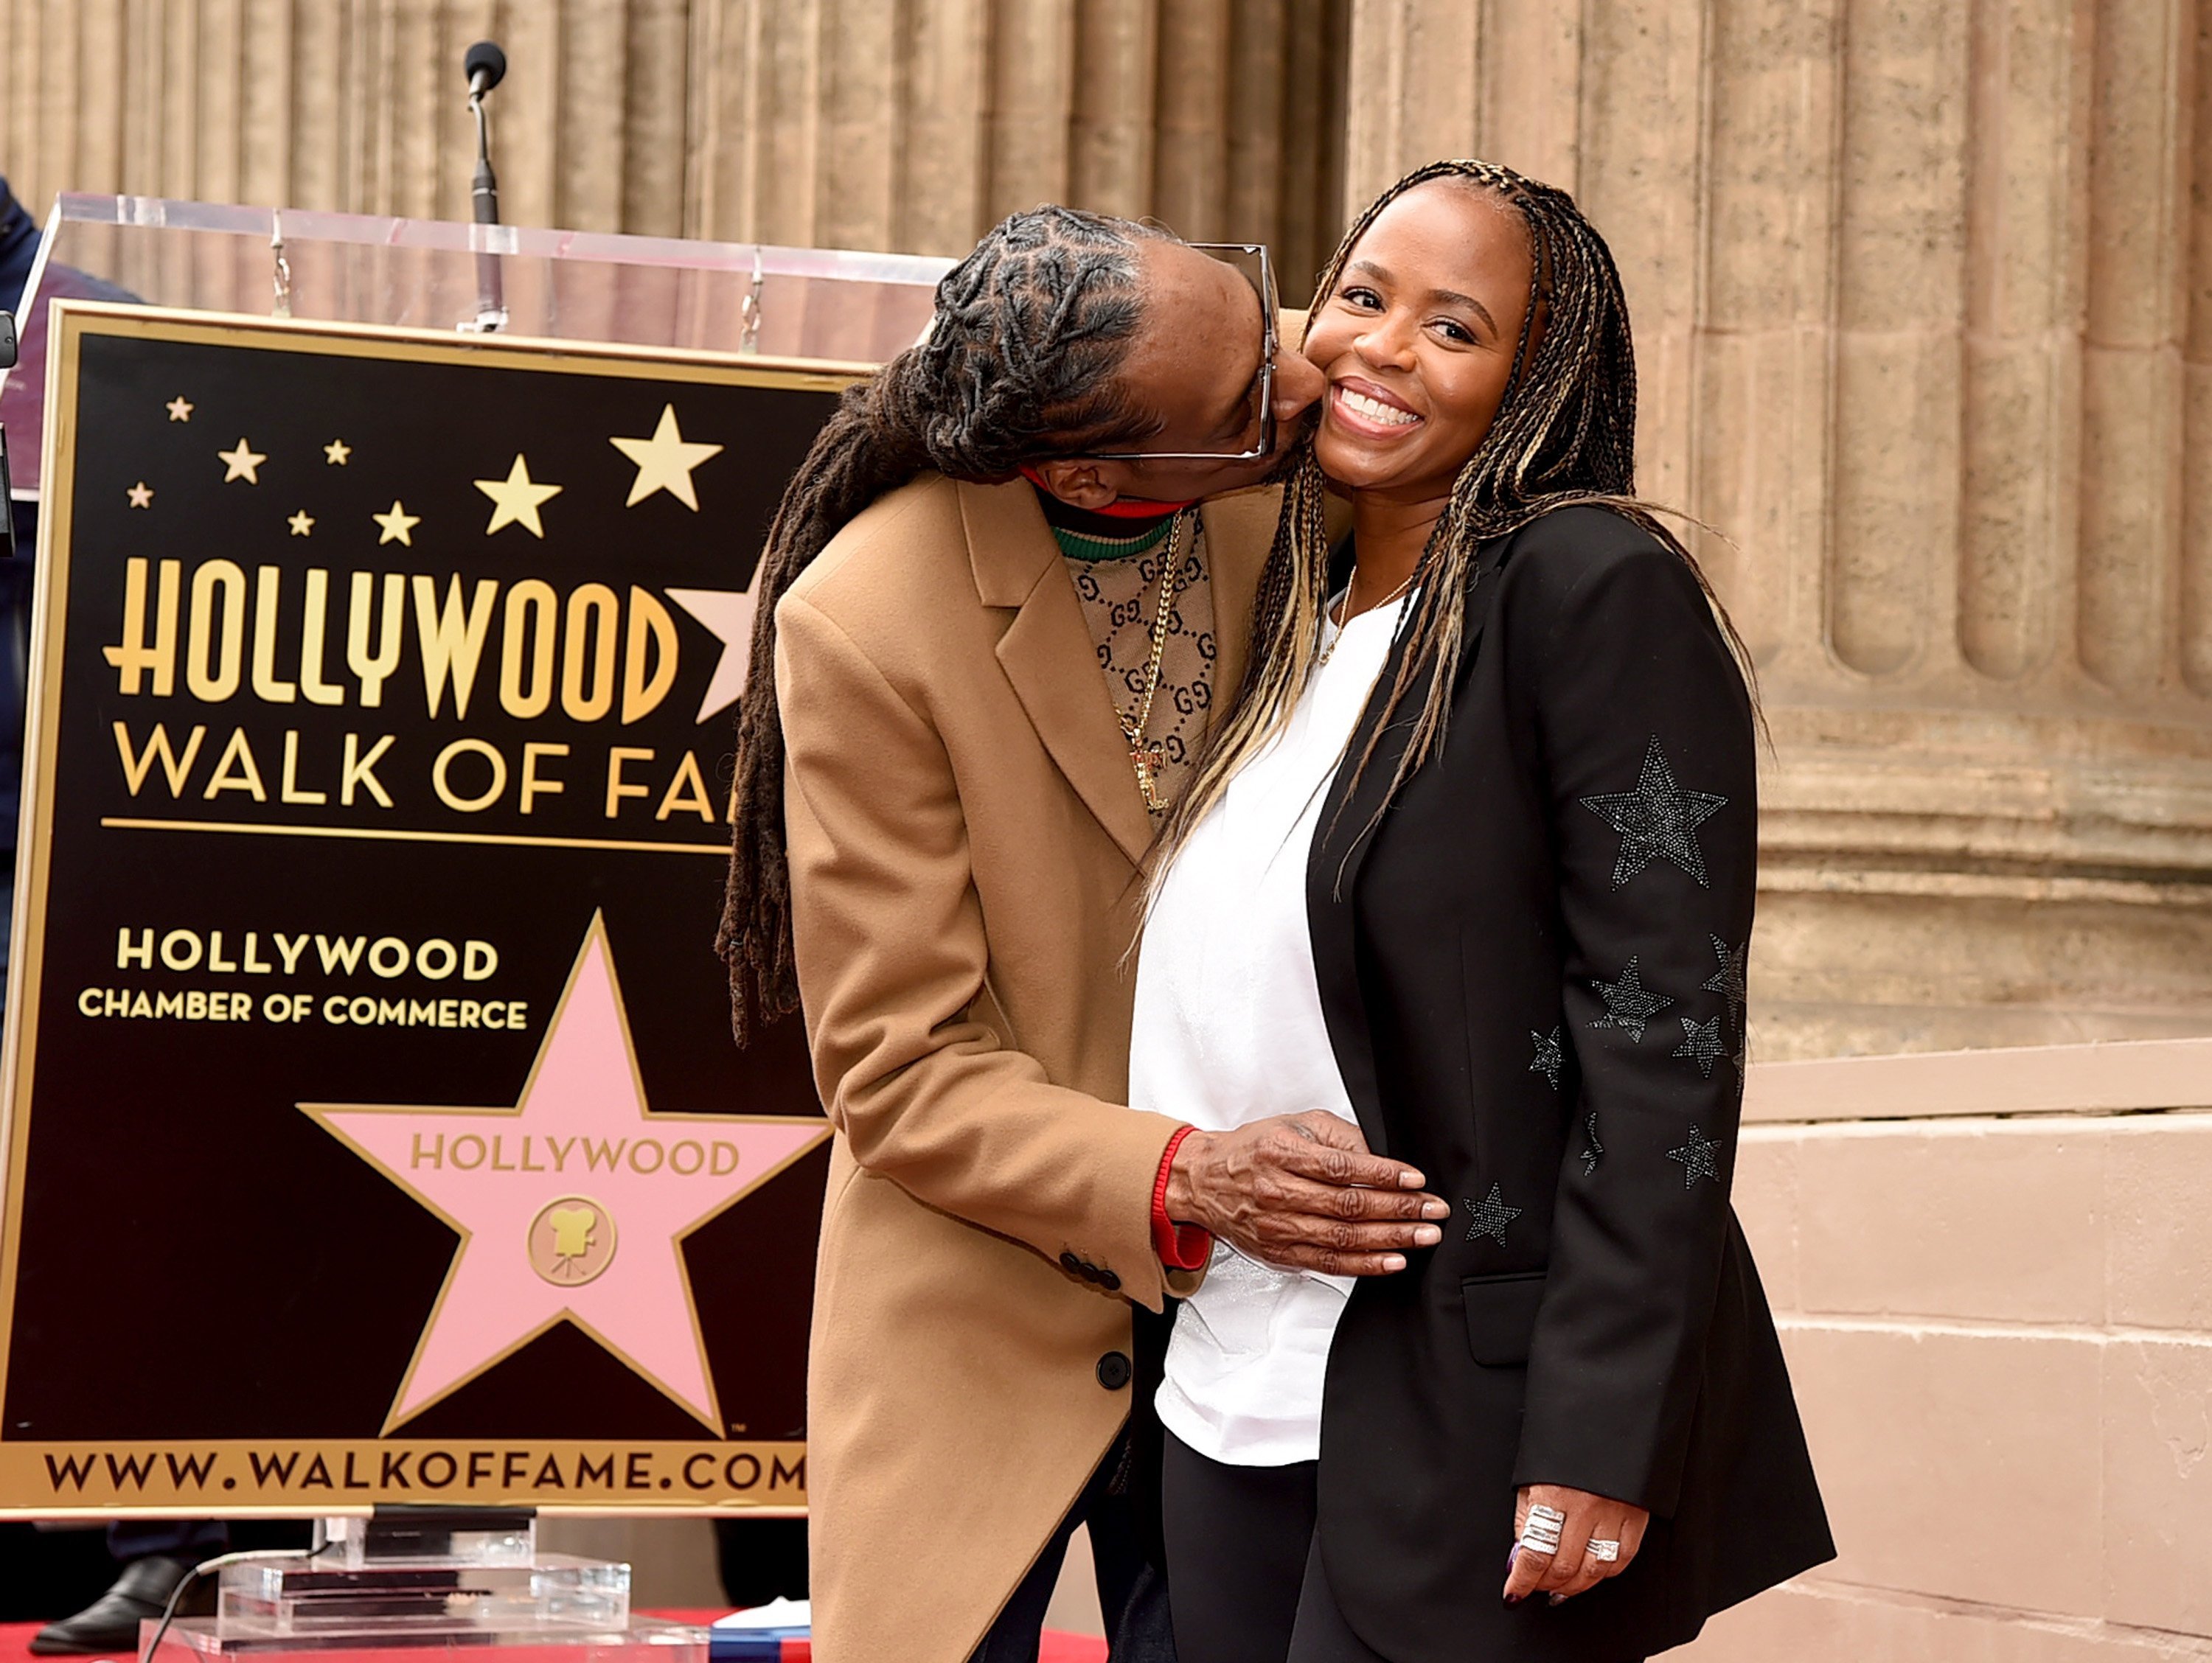 Snoop Dogg, with his wife Shante Broadus, is honored with a star on The Hollywood Walk Of Fame on Nov. 19, 2018 in California | Photo: Getty Images